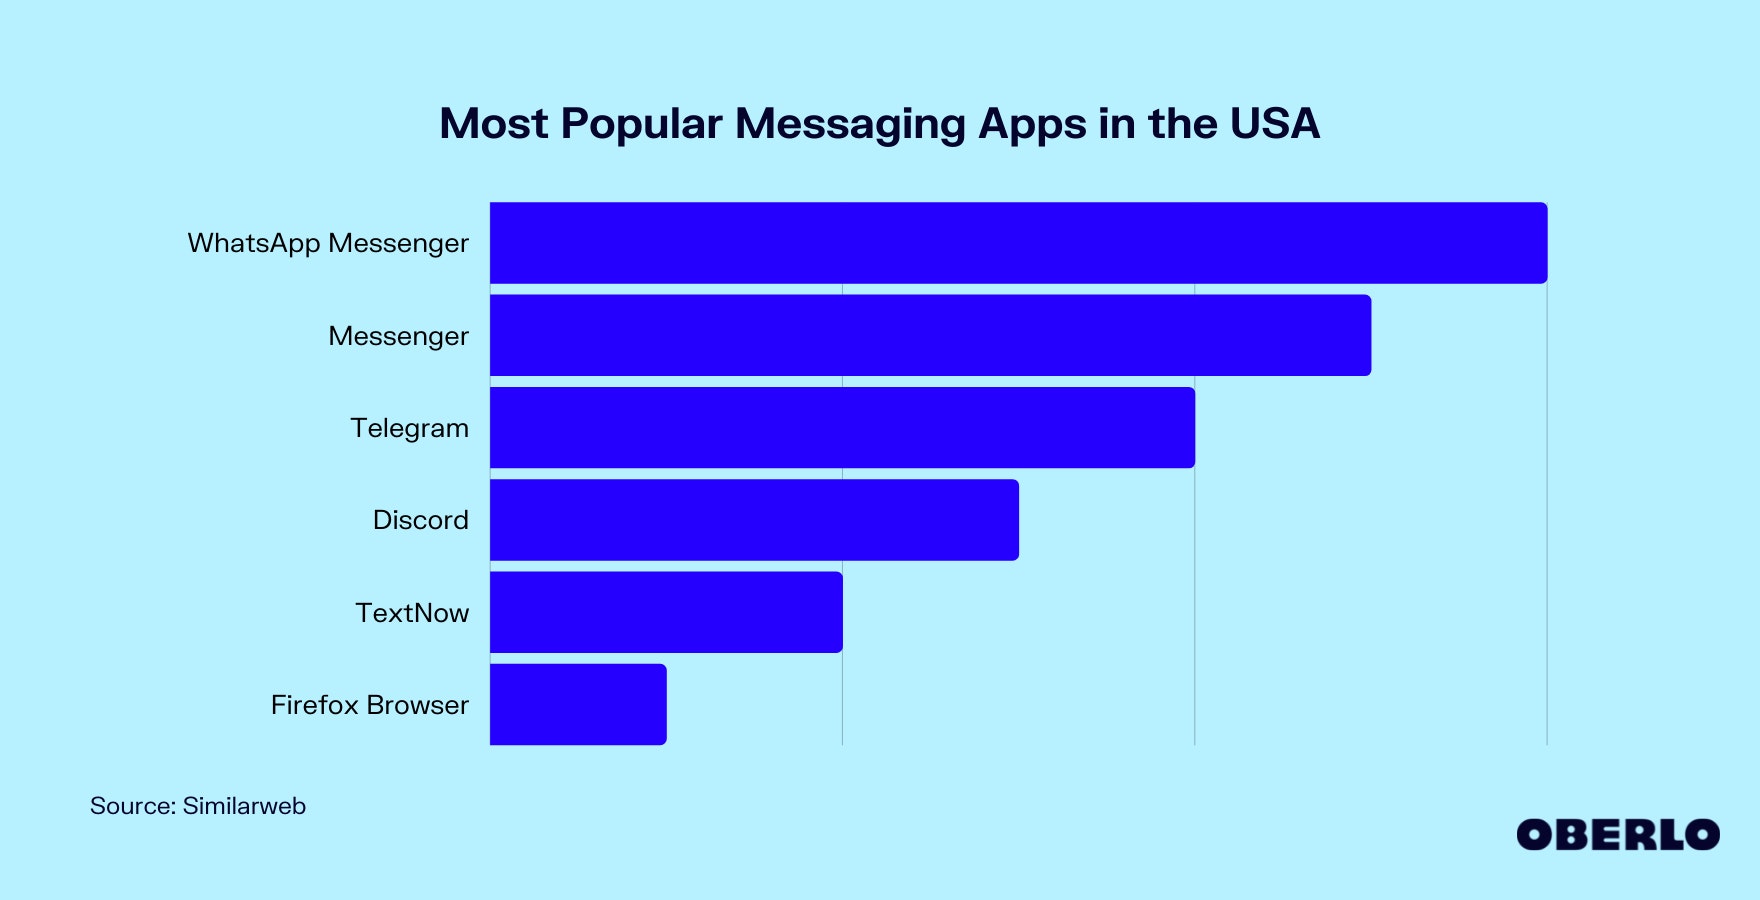 Chart of Most Popular Messaging Apps in the USA